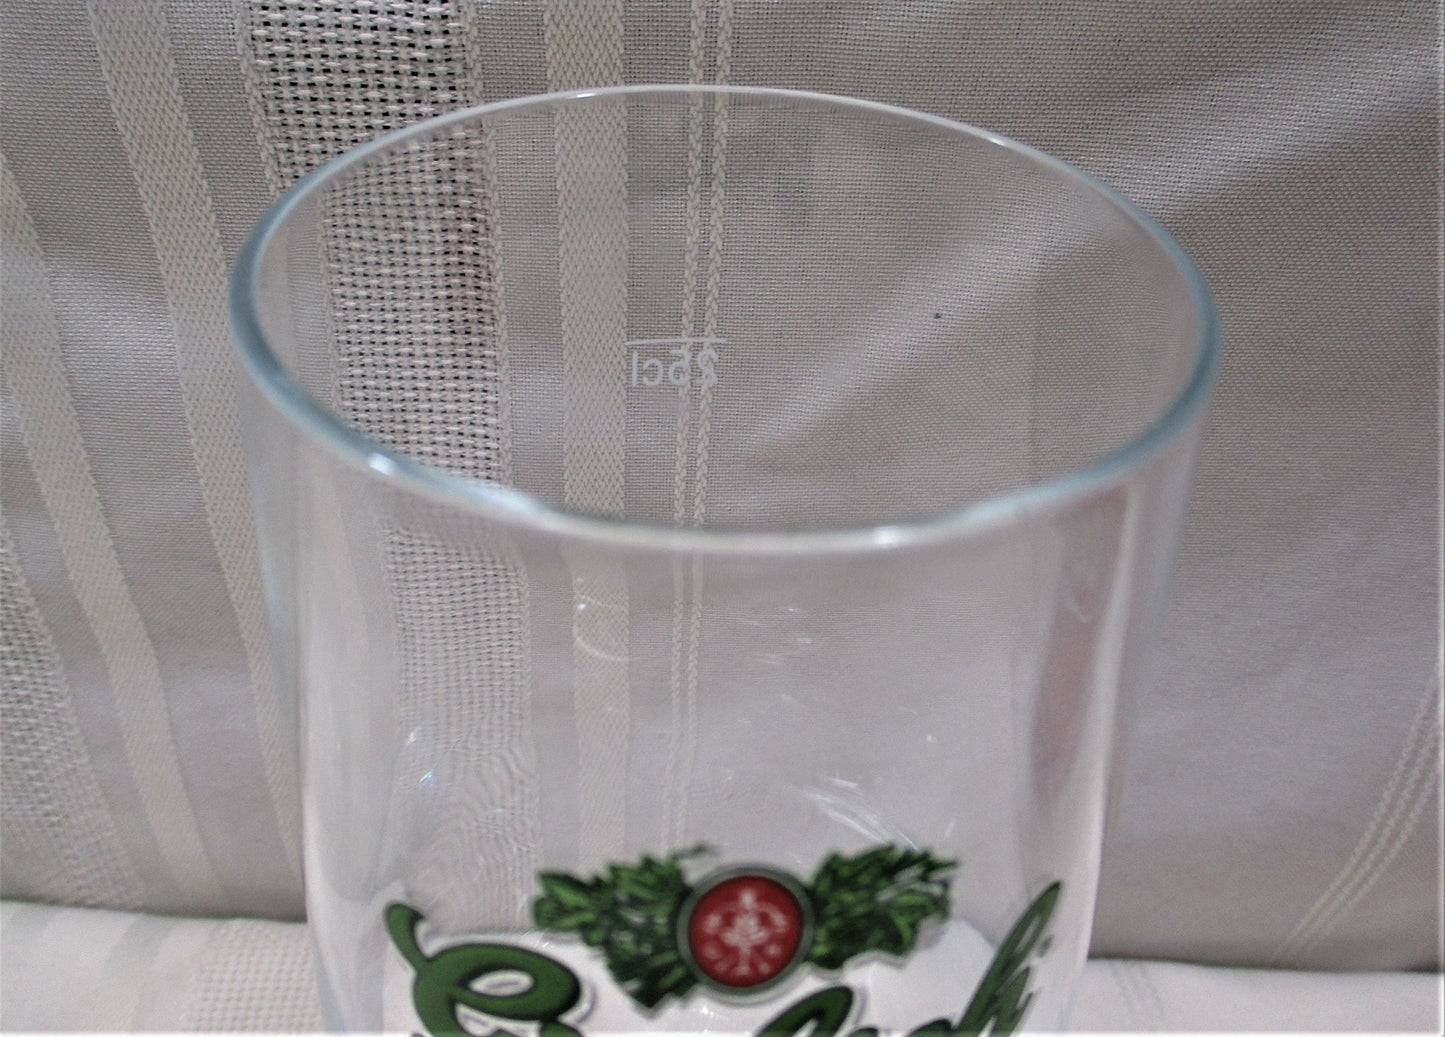 Groslch Beer Glass (74690 - Cactus Jax Unique Collectibles